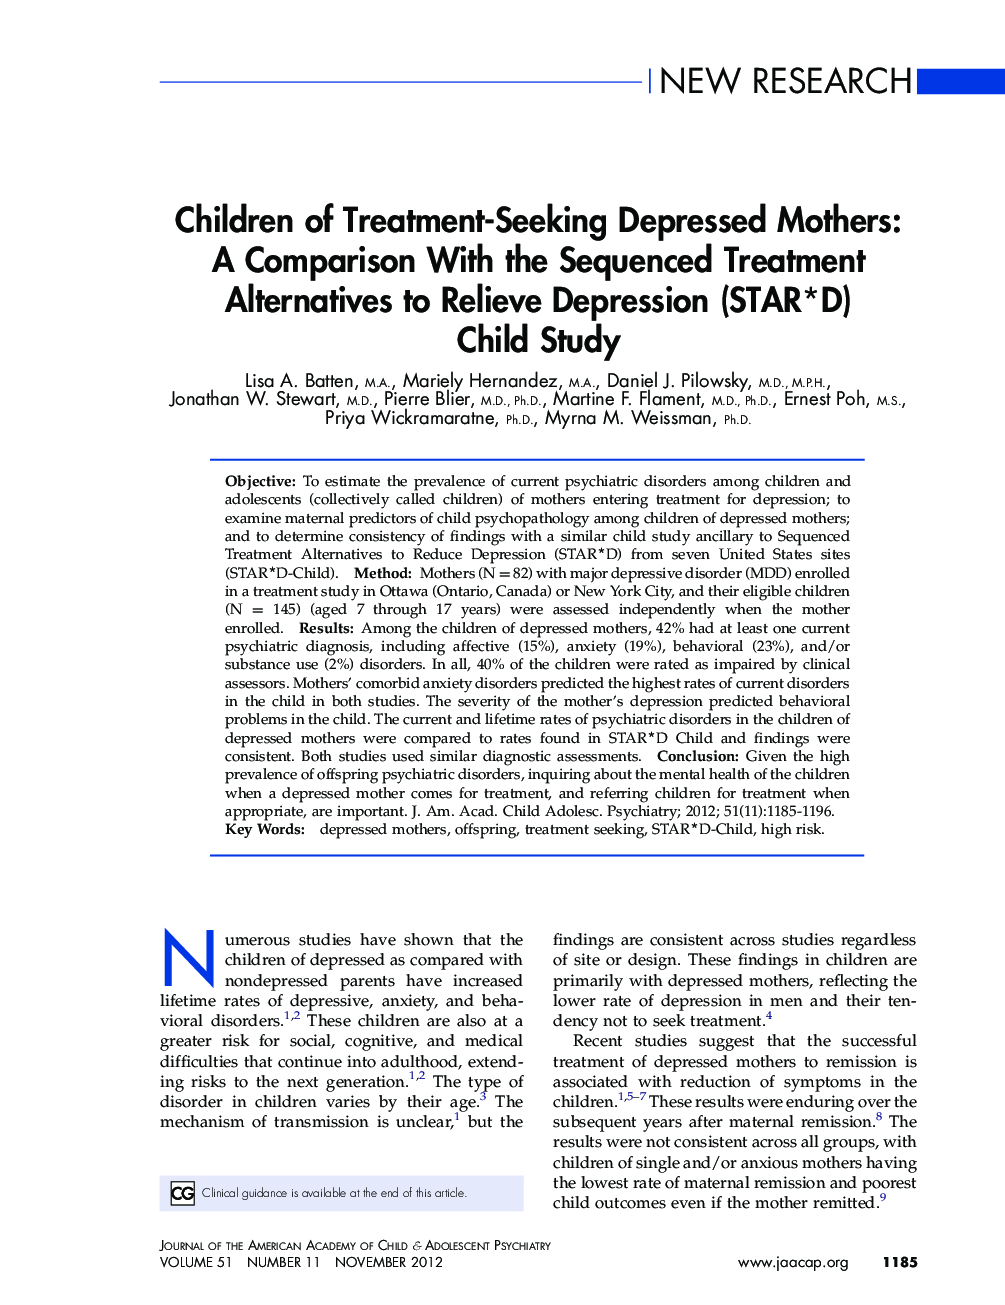 Children of Treatment-Seeking Depressed Mothers: A Comparison With the Sequenced Treatment Alternatives to Relieve Depression (STAR*D) Child Study 